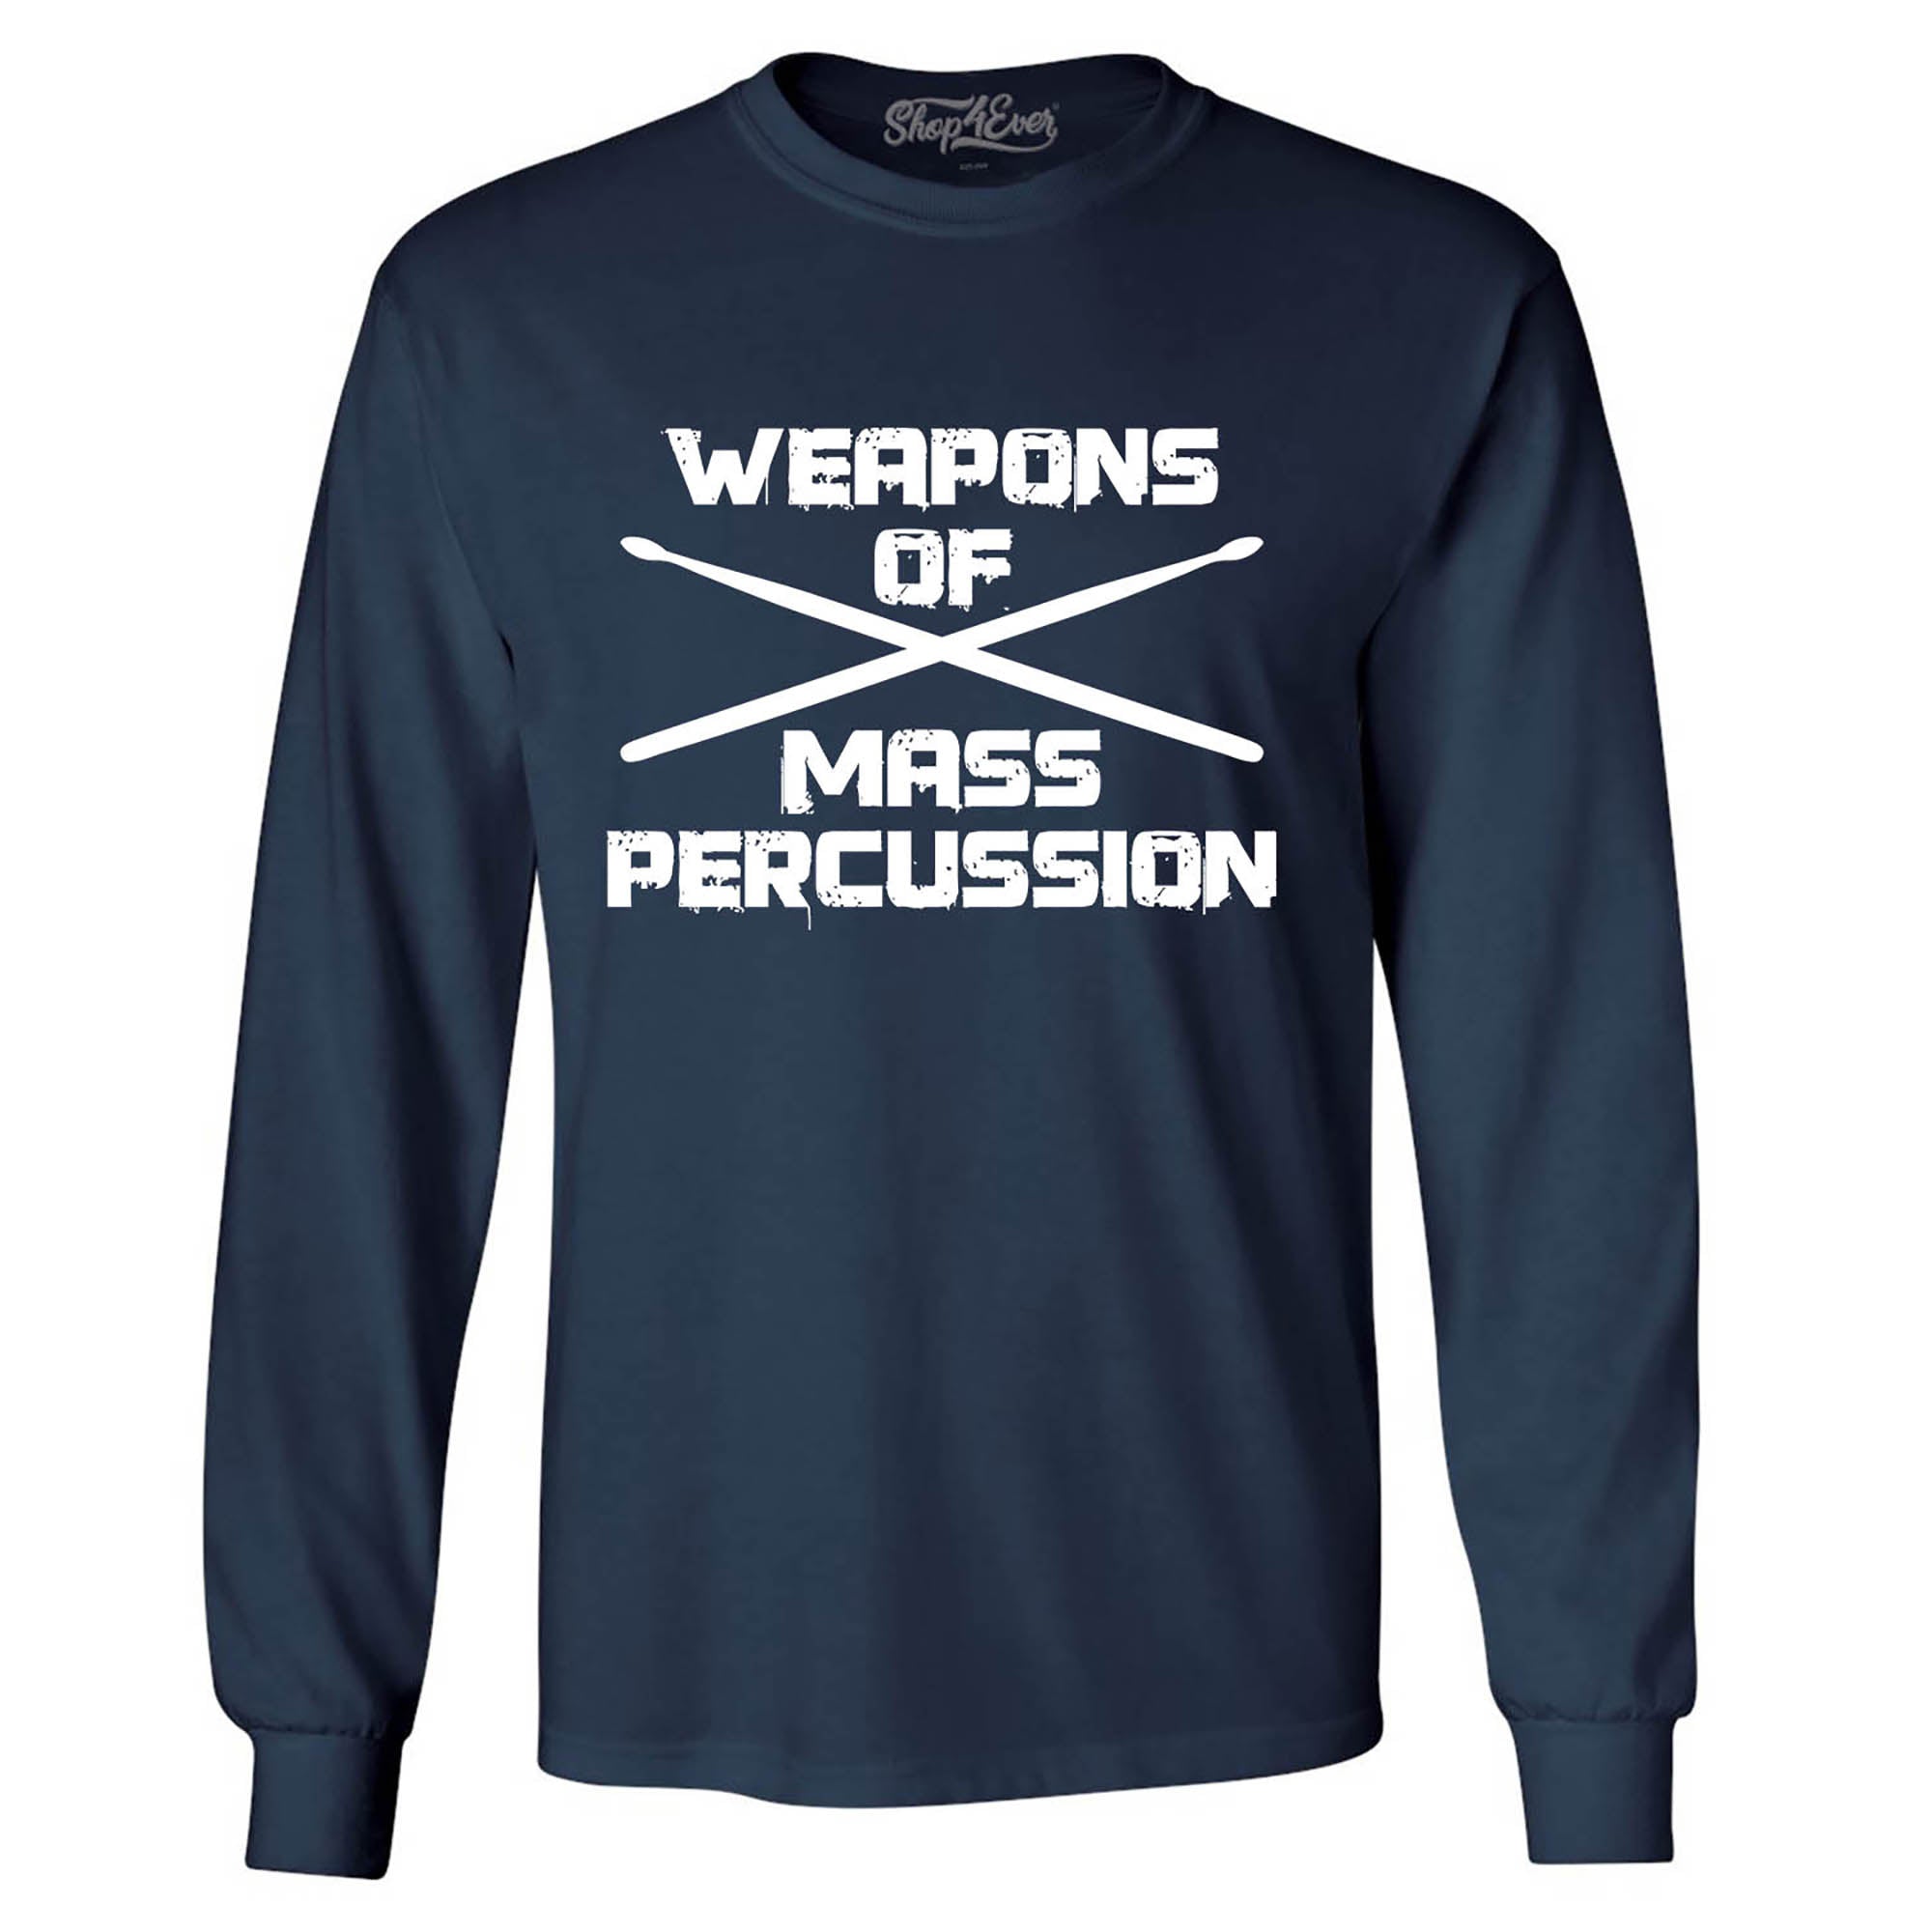 Weapons of Mass Percussion Drumsticks Drummer Long Sleeve Shirt